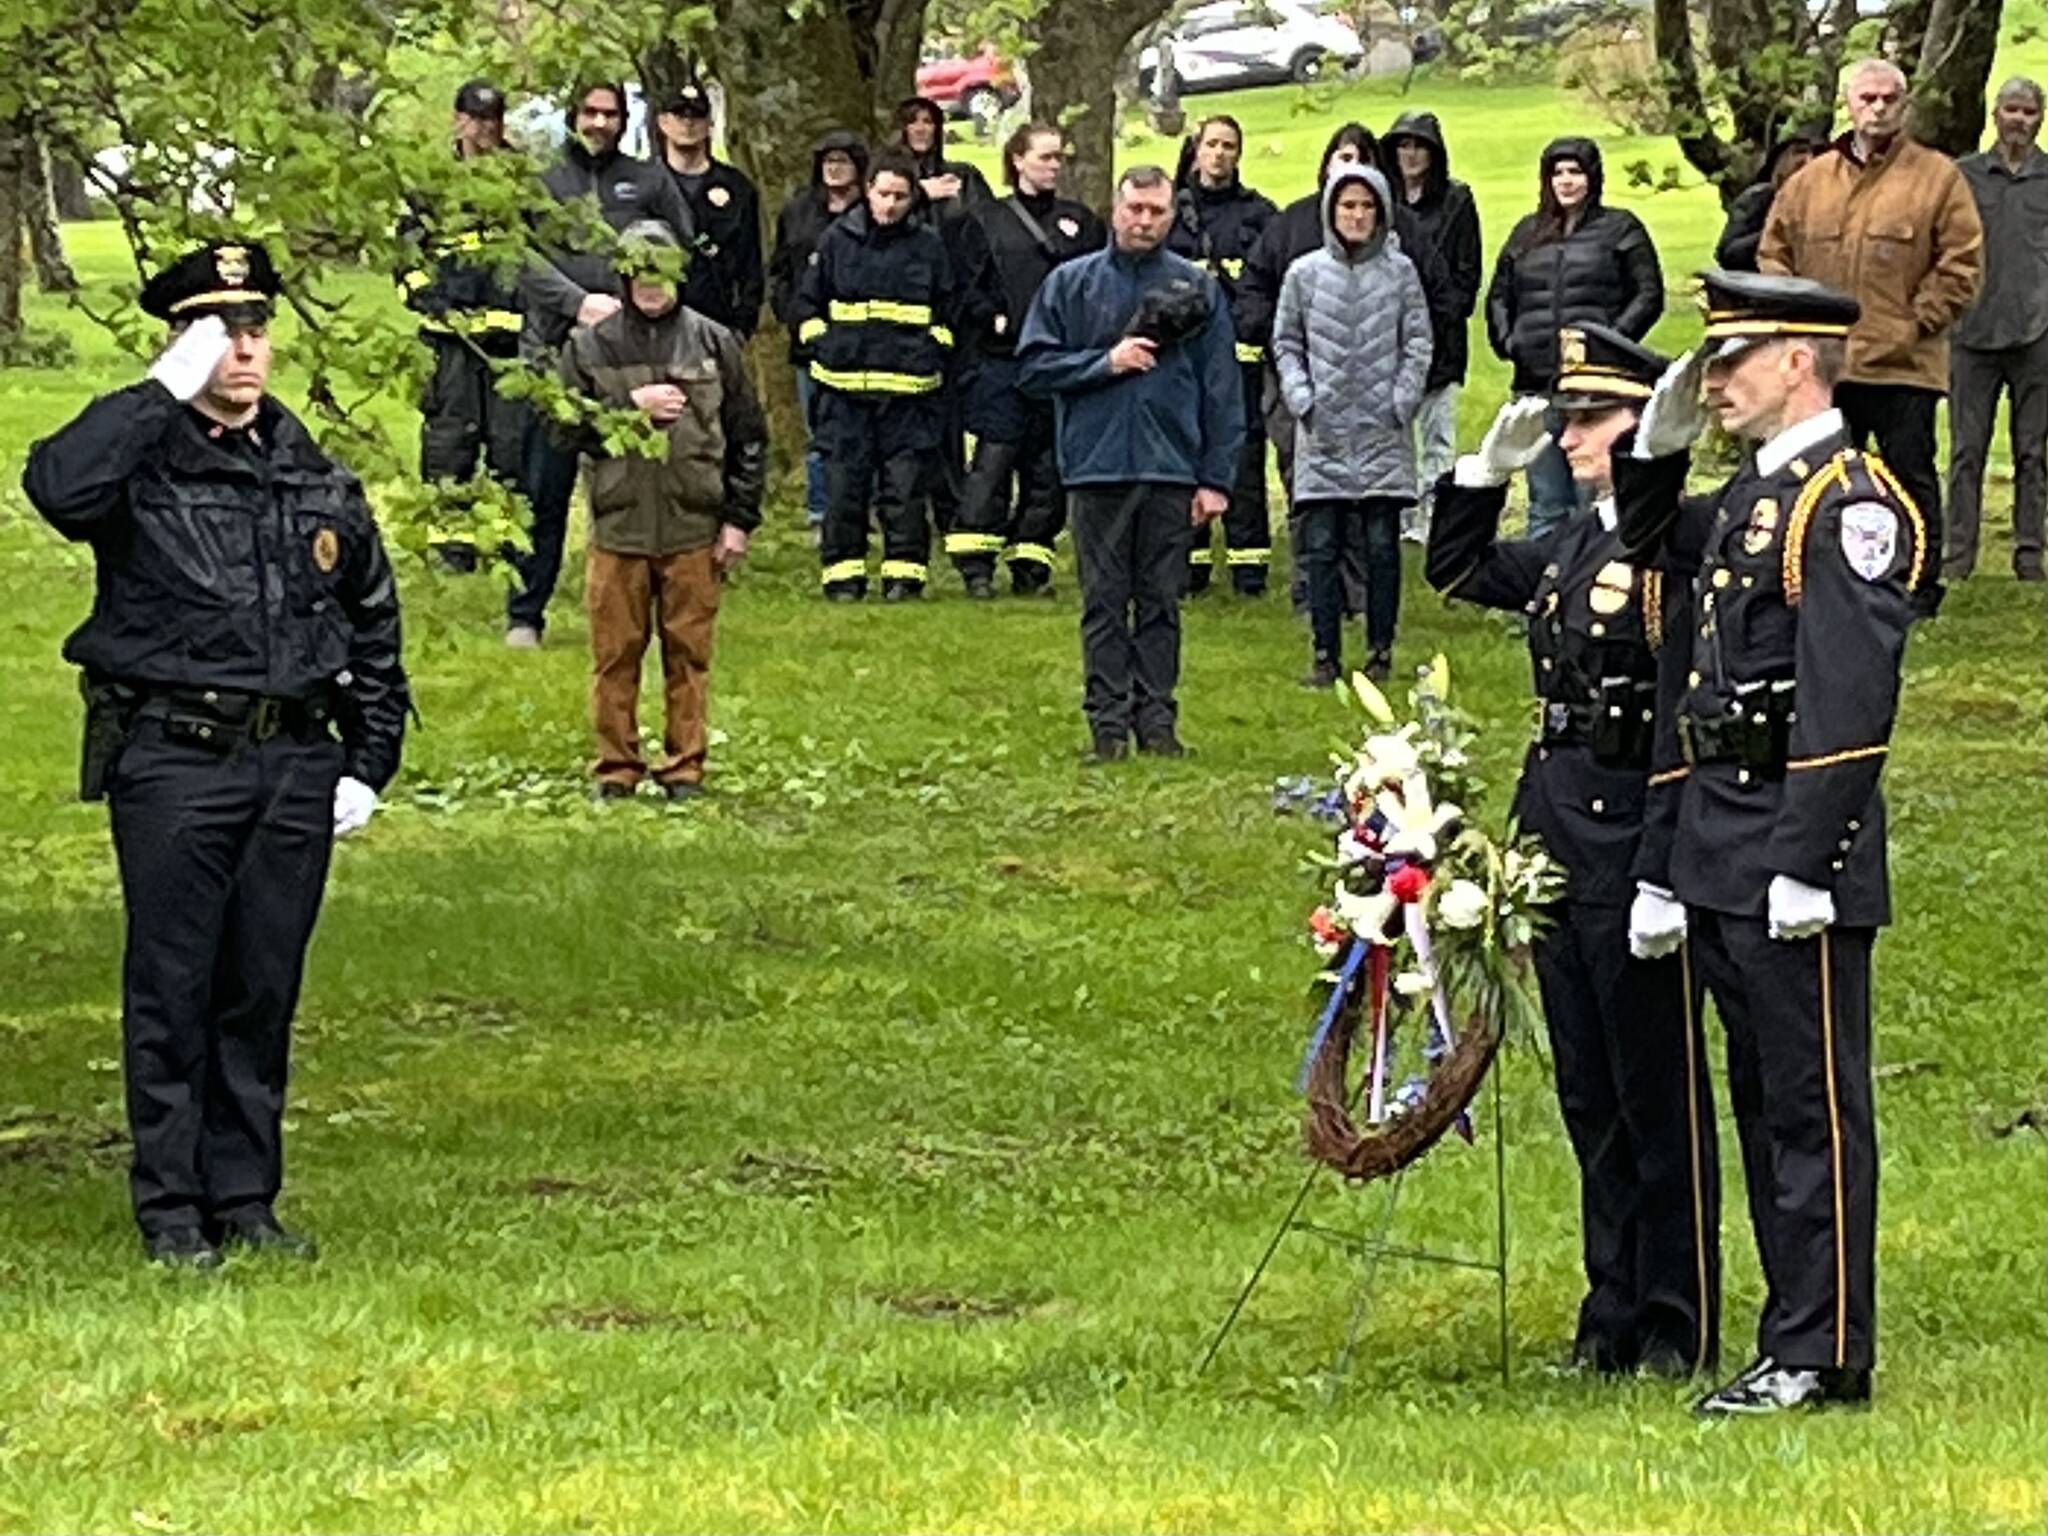 Lt. Krag Campbell salutes members of the Inter-Agency Honor Guard as wreaths were laid at the graves of Chief of Detectives Donald Thomas Dull and Officer Richard J. Adair on Friday during the Alaska Peace Officers Association’s annual memorial service at Evergreen Cemetery. (Jonson Kuhn / Juneau Empire)